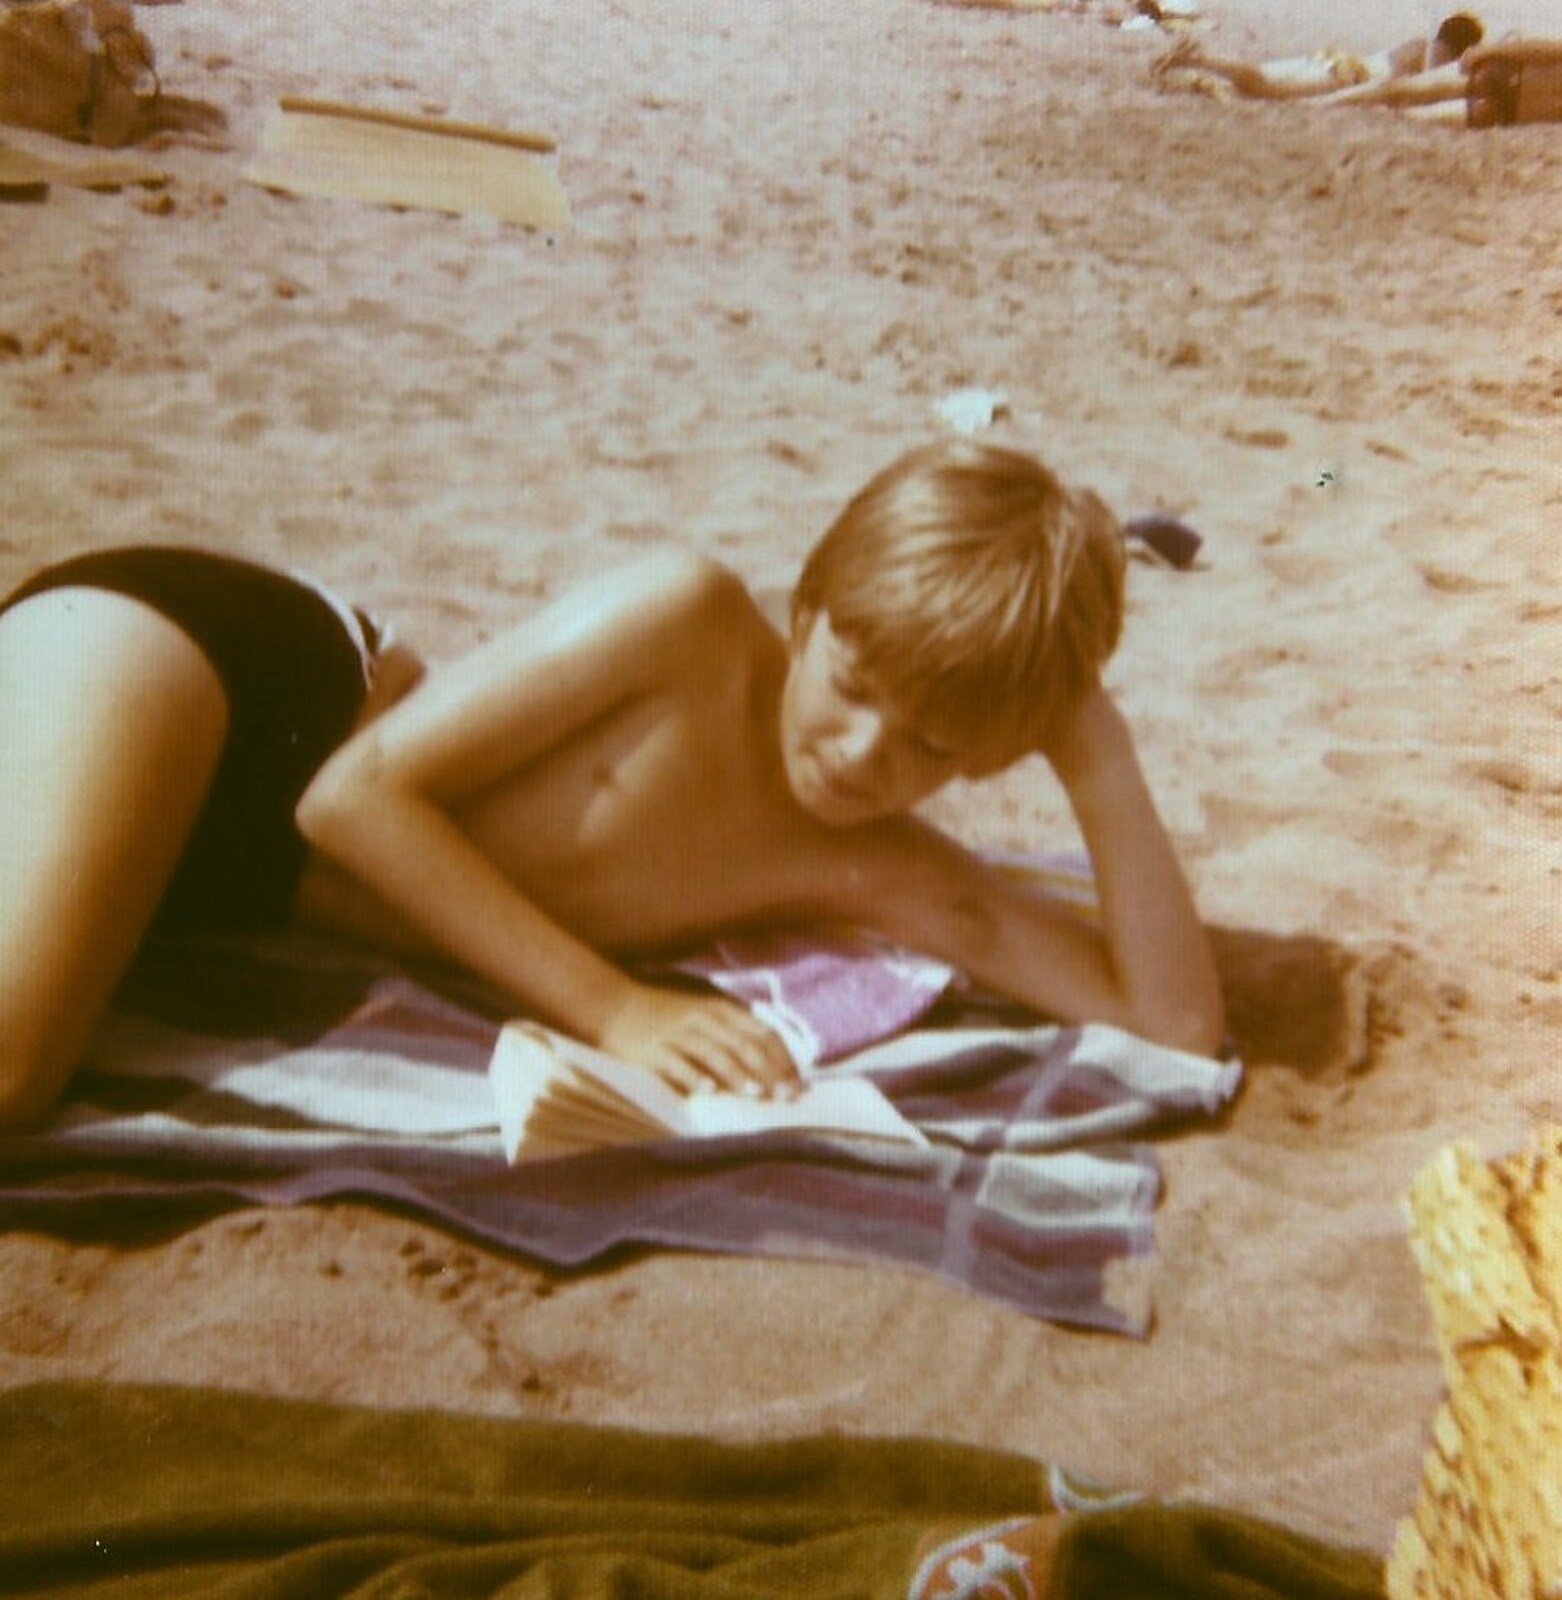 Nosher reads a book on a Mediterranean beach from A Trip to Bram, Aude, France - 25th July 1980